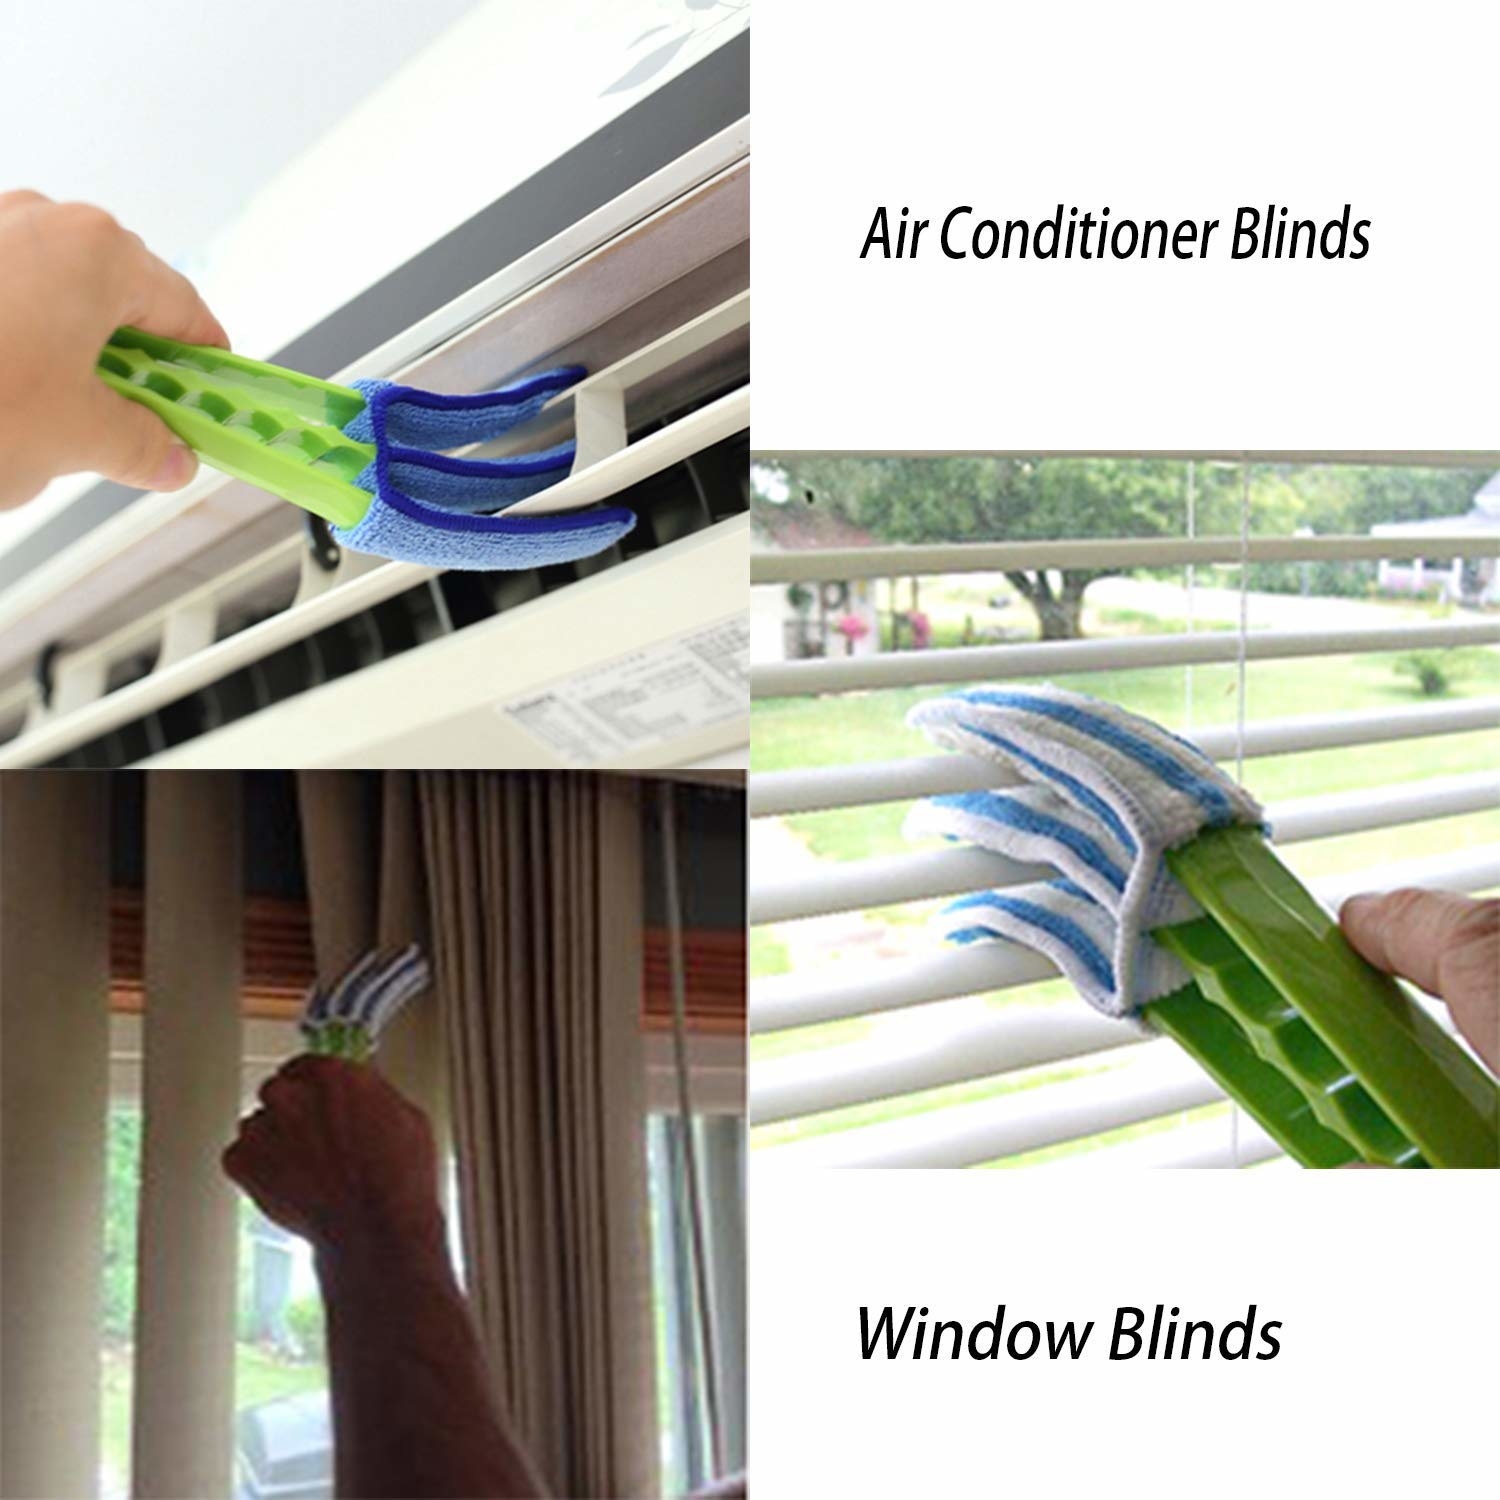 A collage of images showing the wand cleaning air conditioner blinds and window blinds